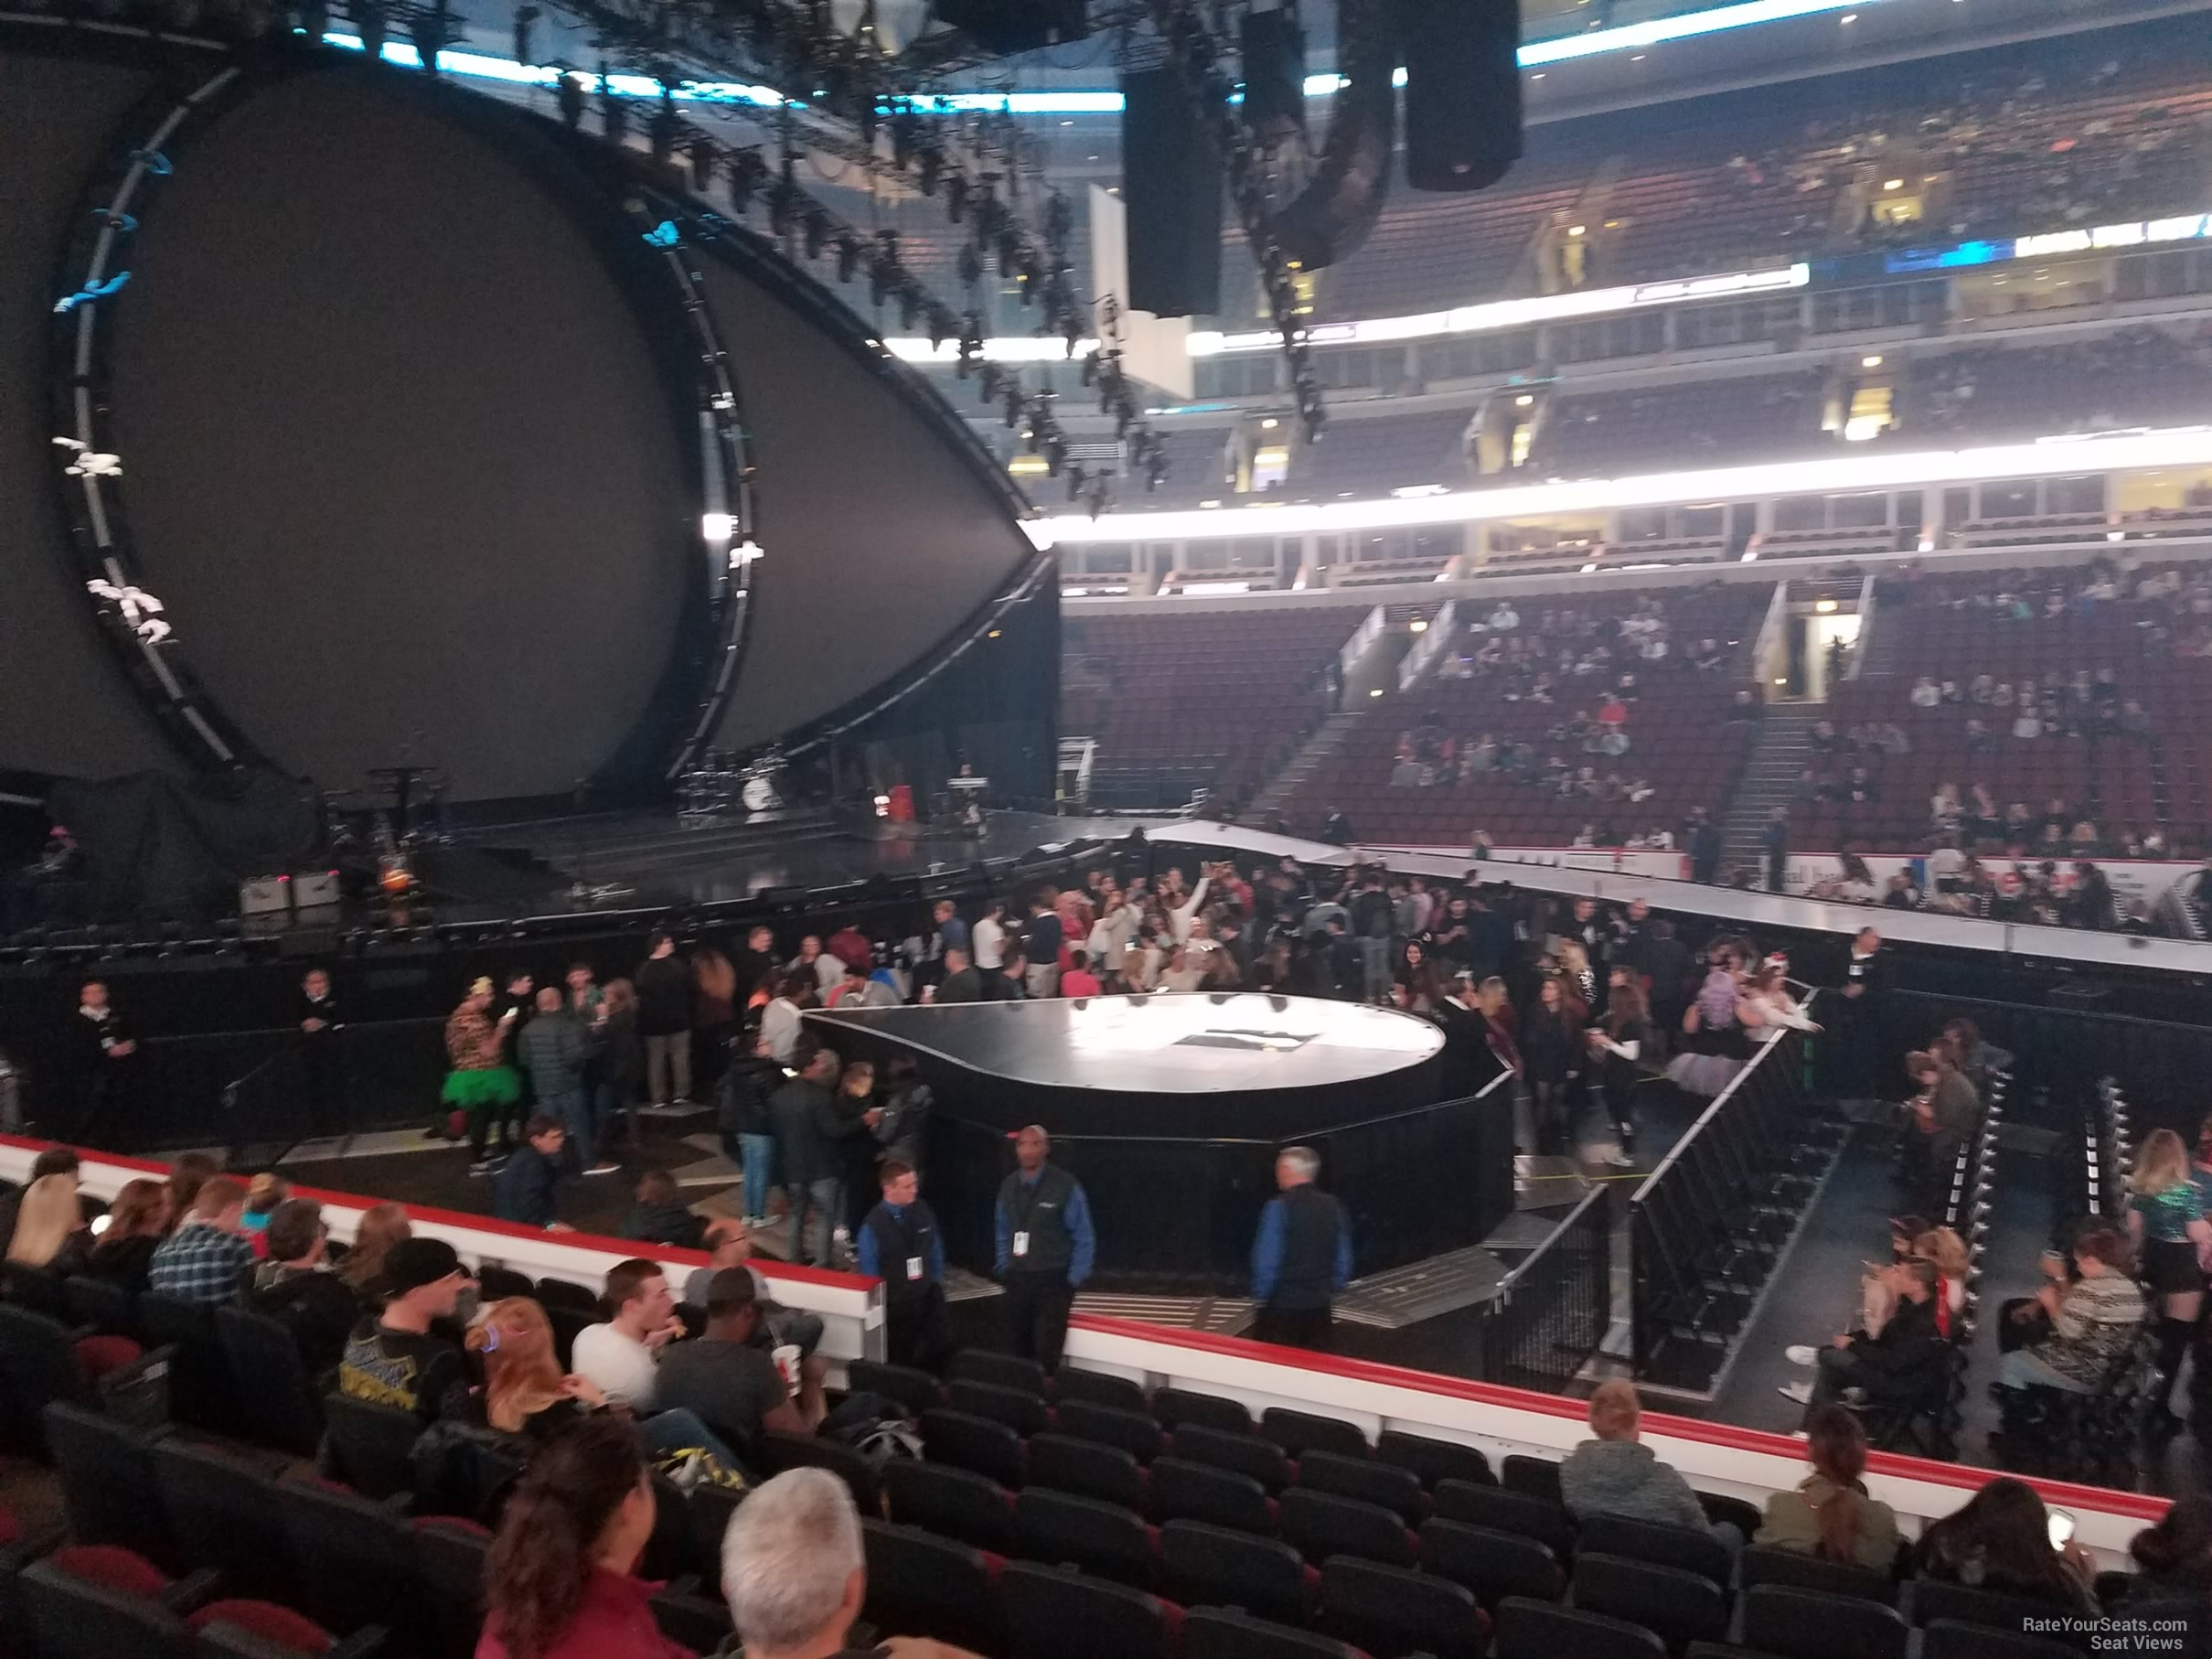 section 112, row 12 seat view  for concert - united center